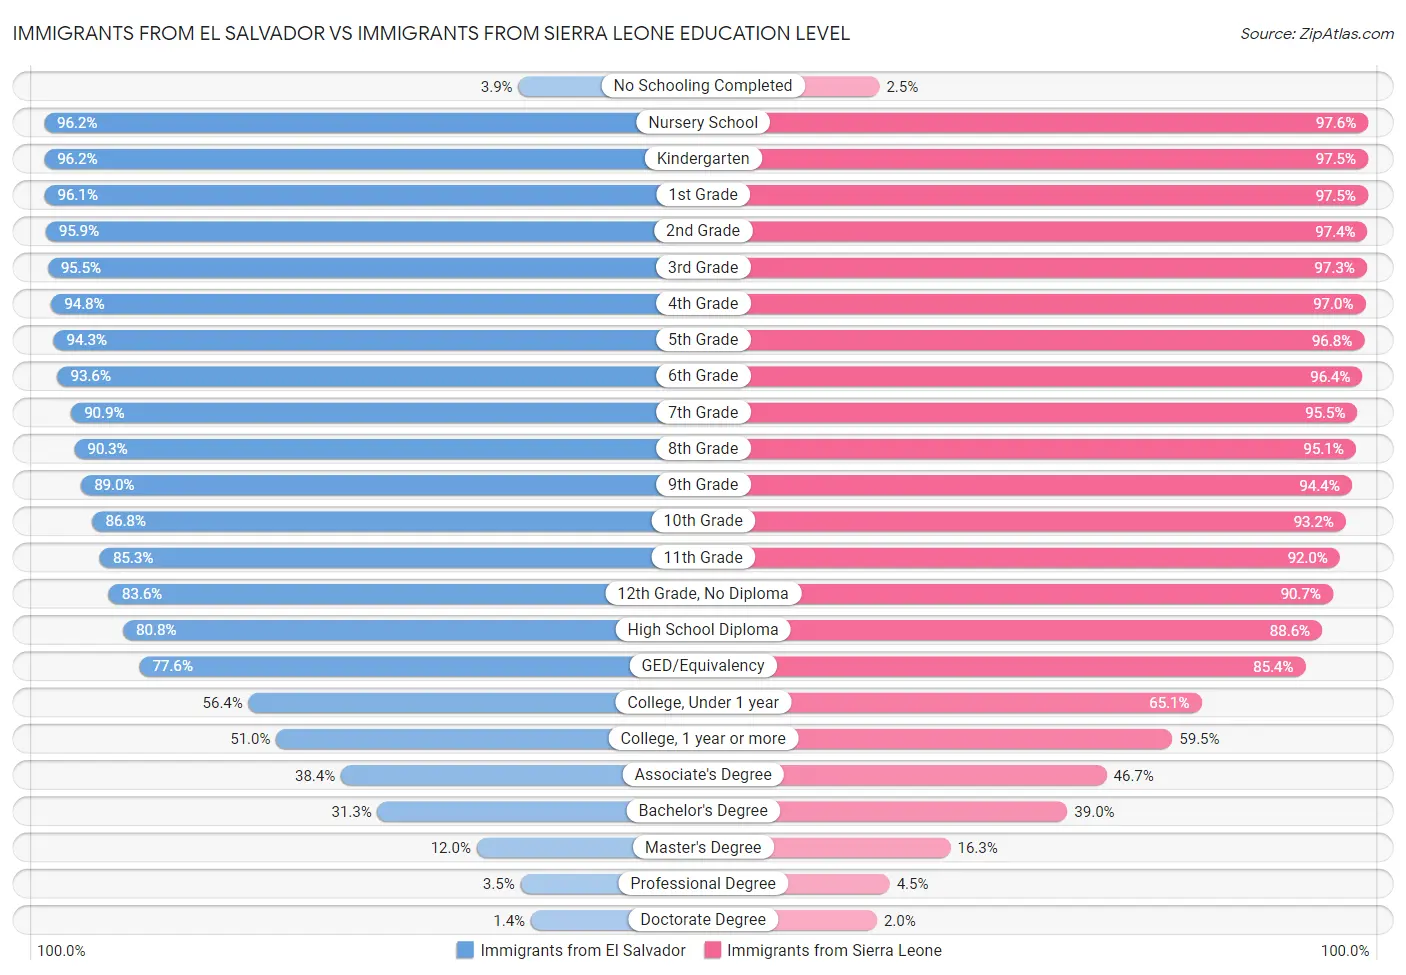 Immigrants from El Salvador vs Immigrants from Sierra Leone Education Level